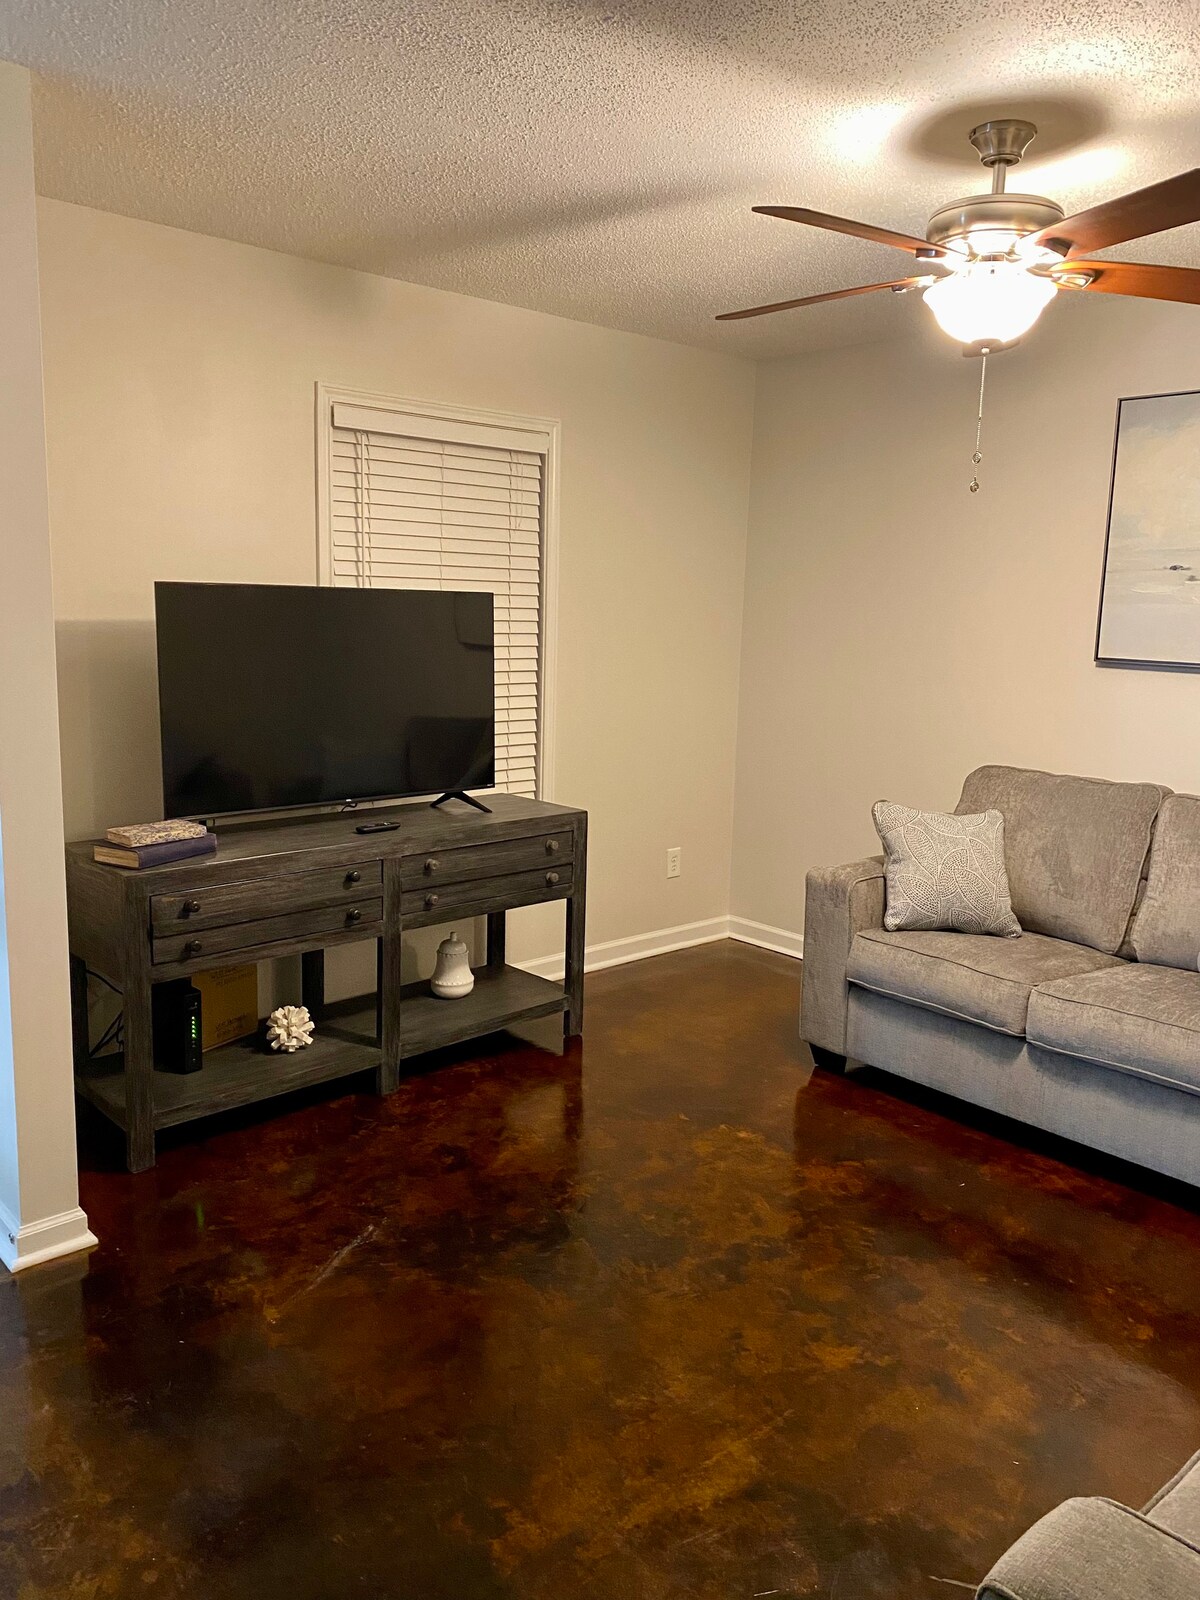 Newly renovated
2
Bedroom/ 2 Bathroom Sout